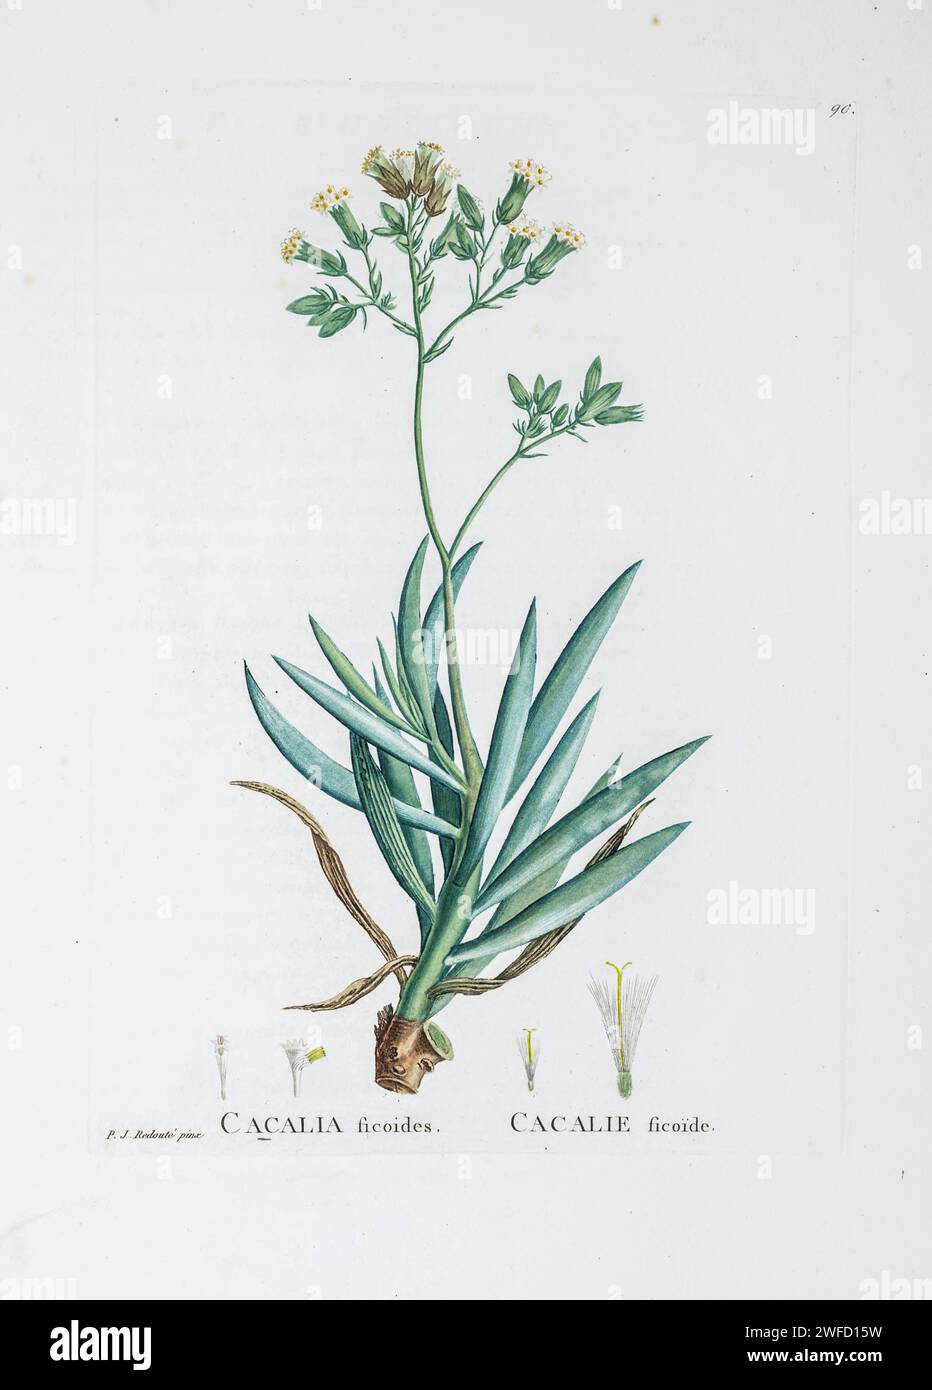 Senecio ficoides (L.) Sch. Bip.  Here As Cacalia ficoides from History of Succulent Plants [Plantarum historia succulentarum / Histoire des plantes grasses] painted by Pierre-Joseph Redouté and described by Augustin Pyramus de Candolle 1799 Curio ficoides, syn. Senecio ficoides, also known as skyscraper Senecio and Mount Everest Senecio, is a species of succulent plant, in the genus Curio, indigenous to South Africa. Stock Photo